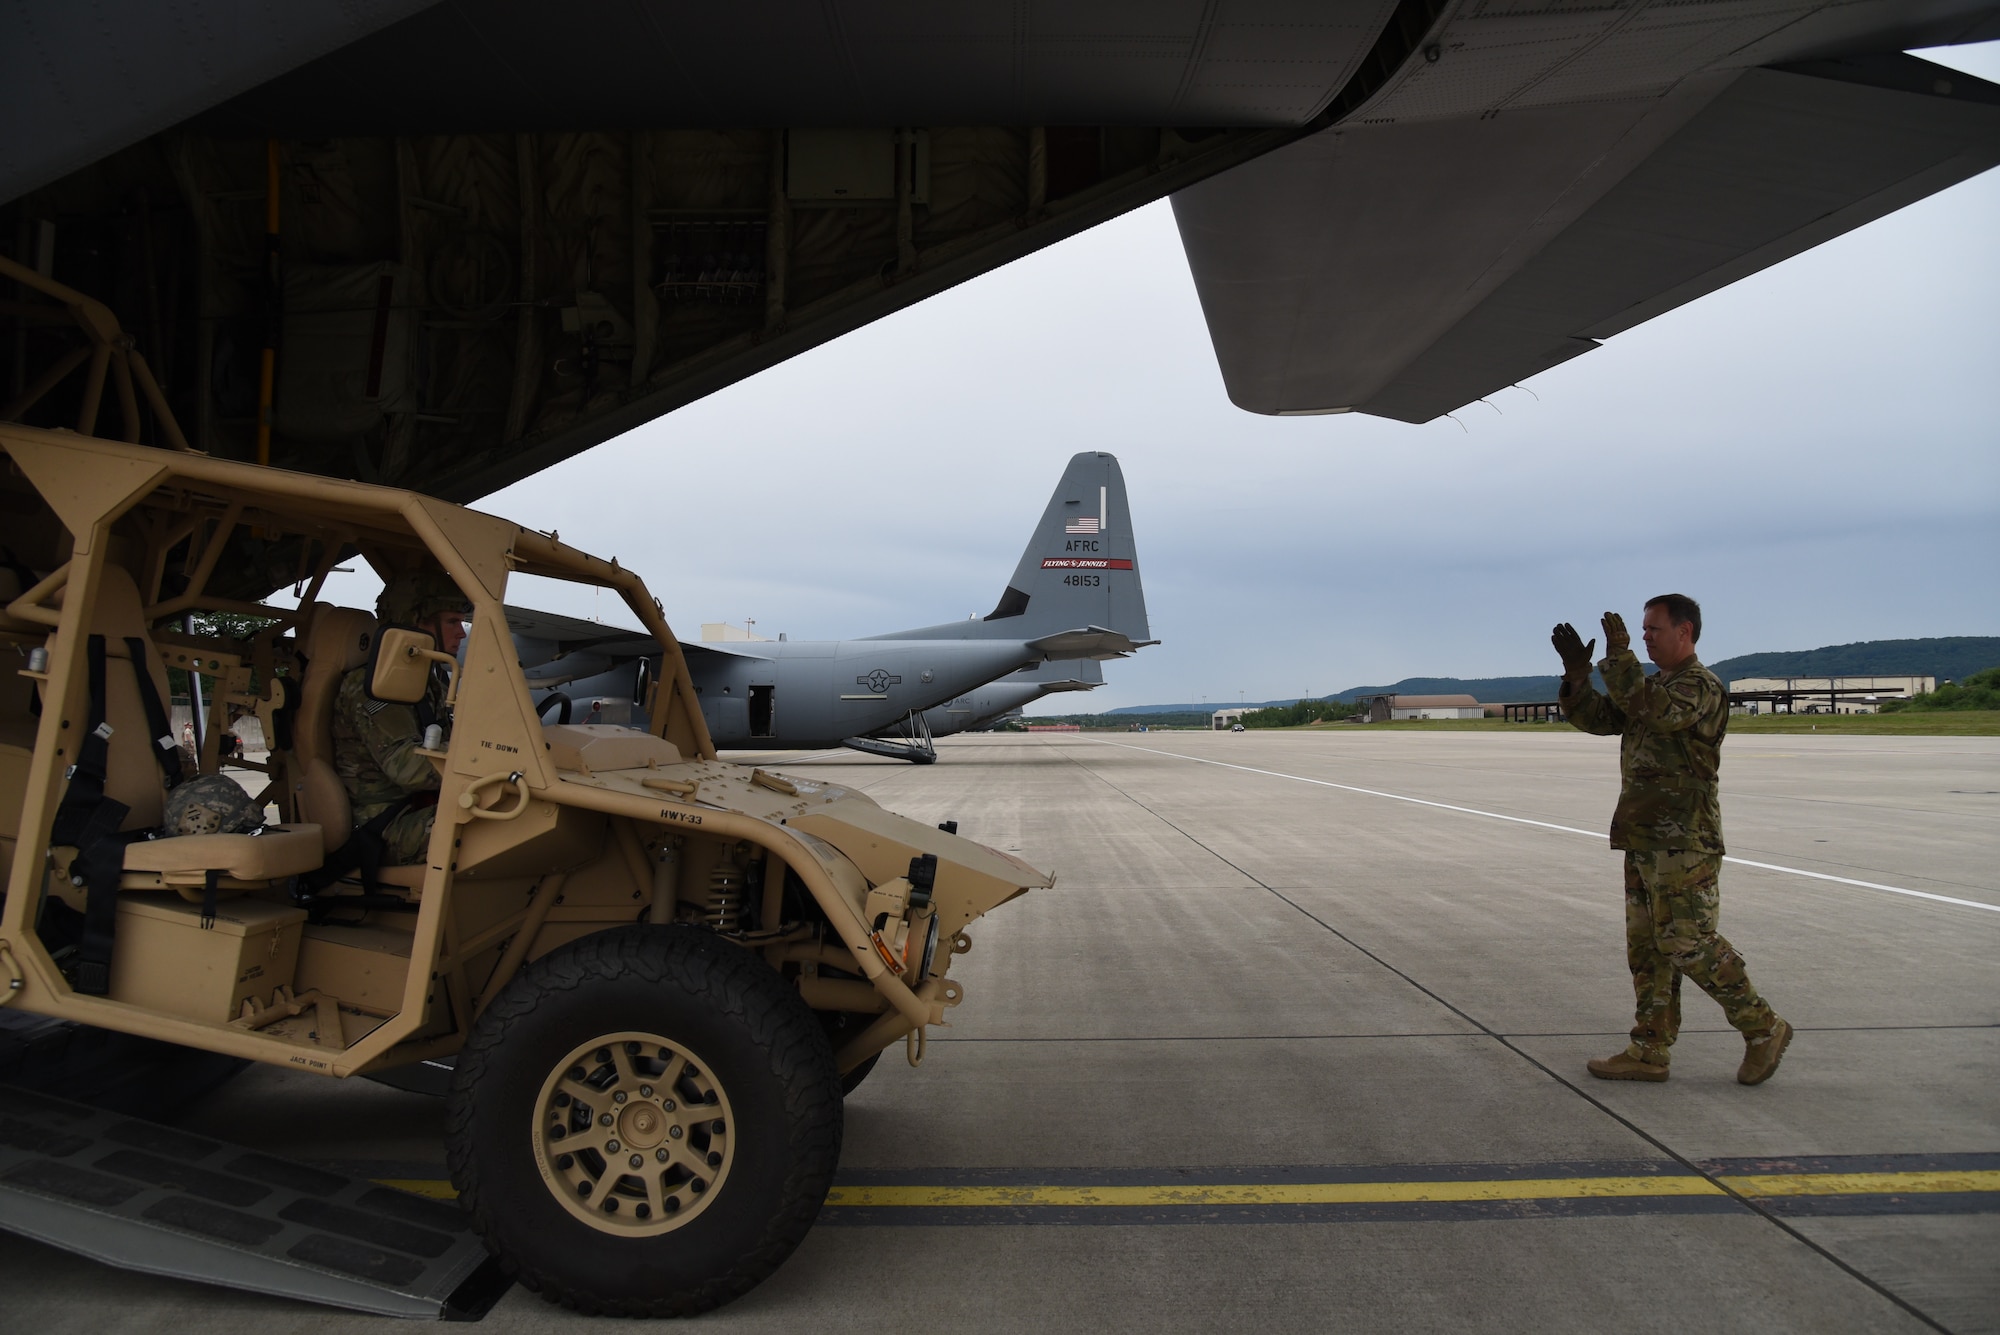 Senior Master Sgt. Dave Cooper, a loadmaster with the 815th Airlift Squadron, 403rd Wing, directs Corporal Jared Guden, 82nd Airborne, scout platoon team leader, as he drove a ground mobility vehicle, onto a C-130J in preparation for exercise Swift Response 19, June 14, 2019. The exercise is one of the premier military crisis response training events featuring high readiness airborne forces from eight NATO nations. Activities include intermediate staging base operations, multiple airborne operations, and several air assault operations. The Swift Response exercises have had great success in creating a foundation for the strong relationships we share with several European allies and partners today. (U.S. Air Force photo by Master Sgt. Jessica Kendziorek)